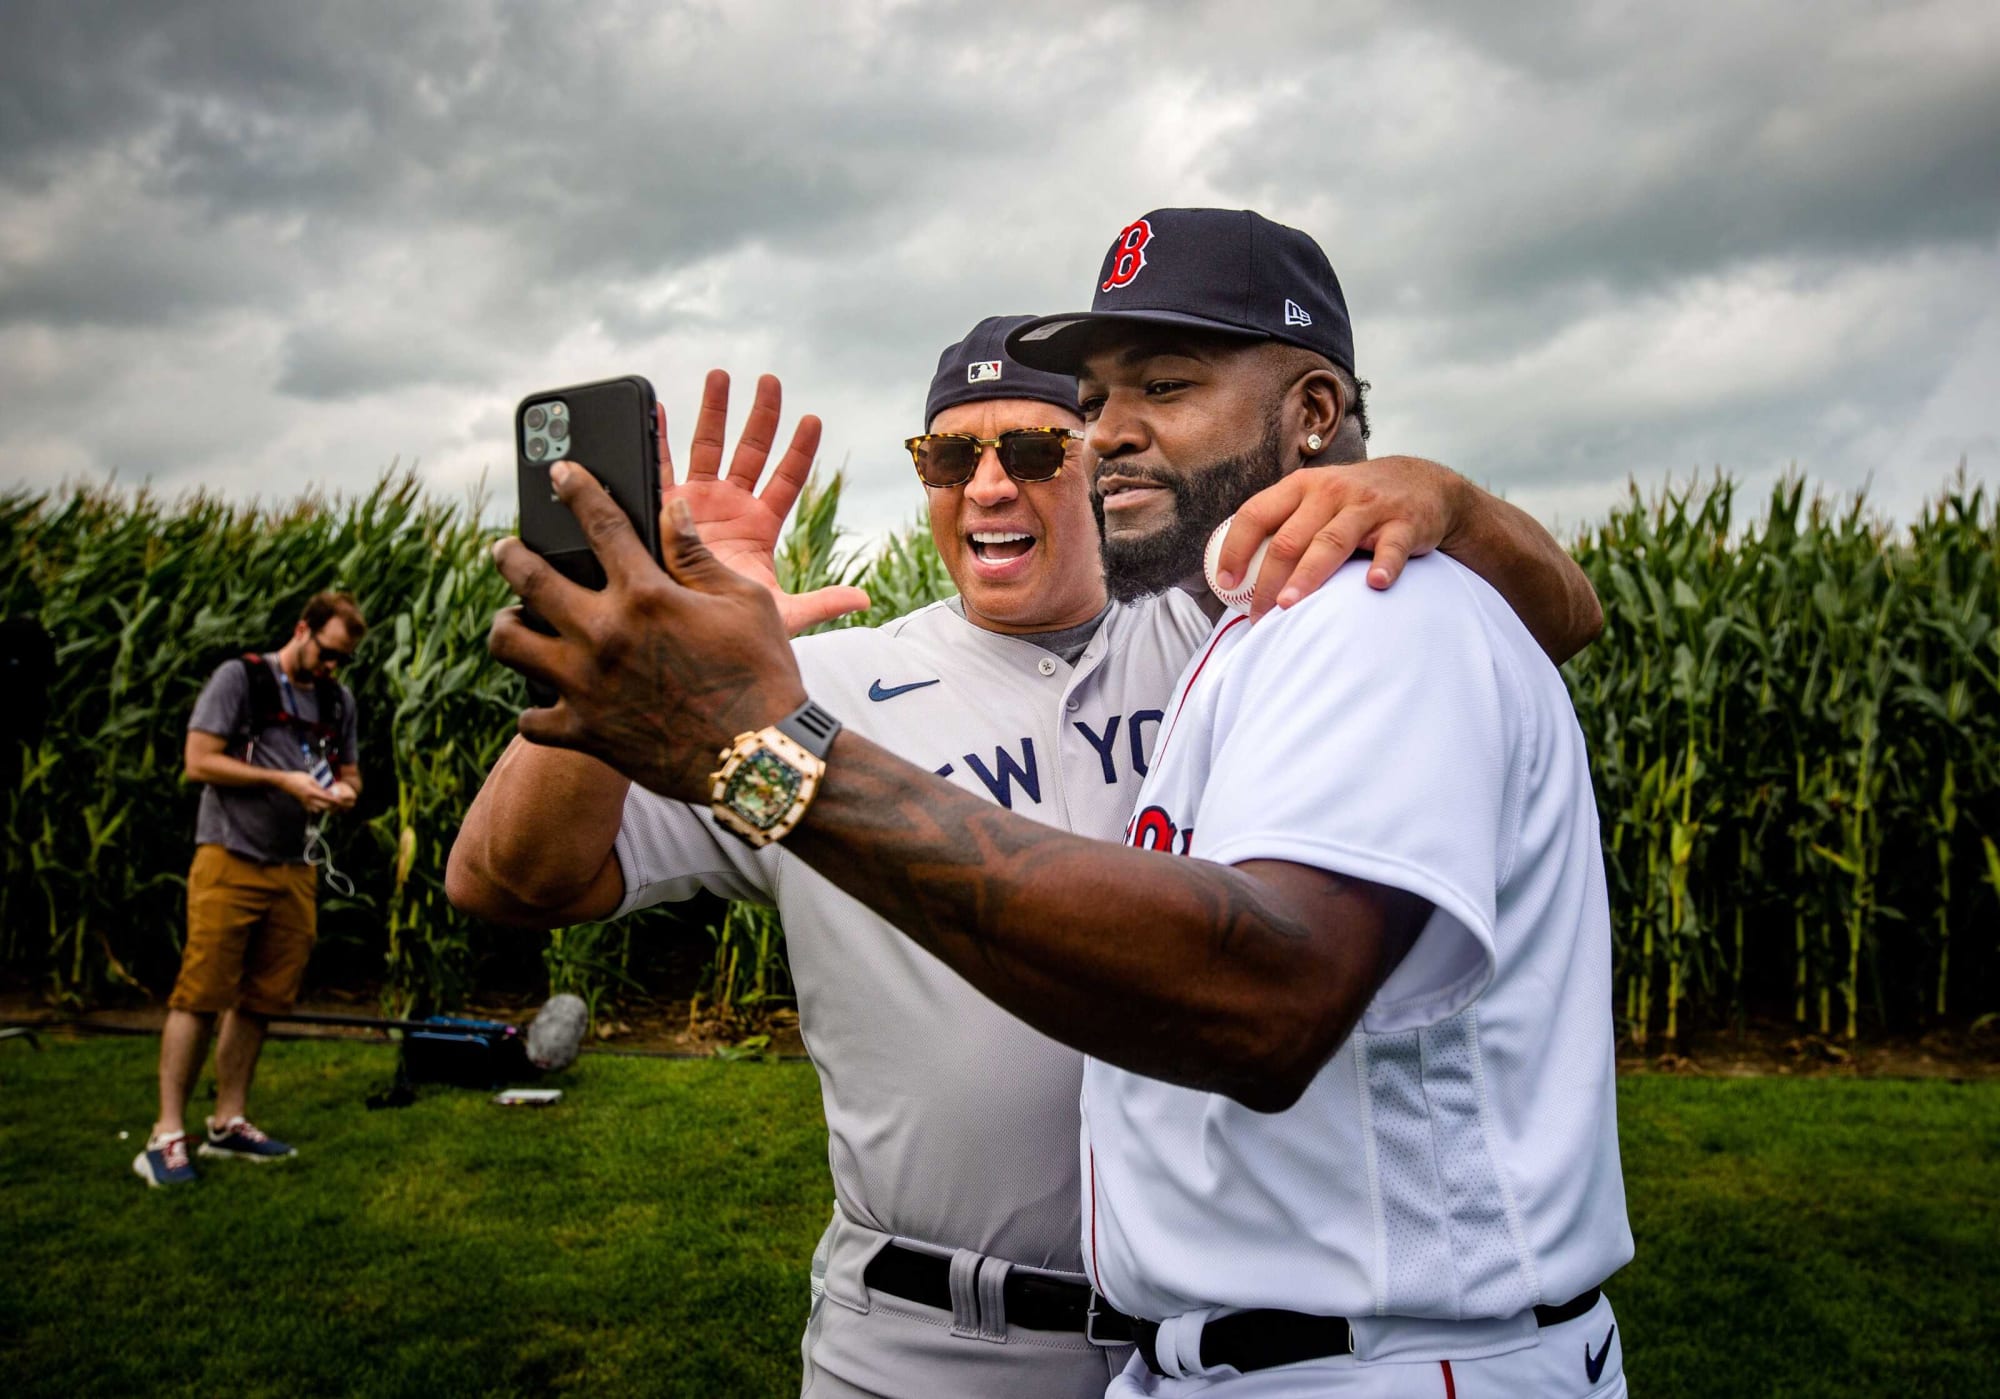 David Ortiz stays true to Red Sox in hilarious Field of Dreams promo